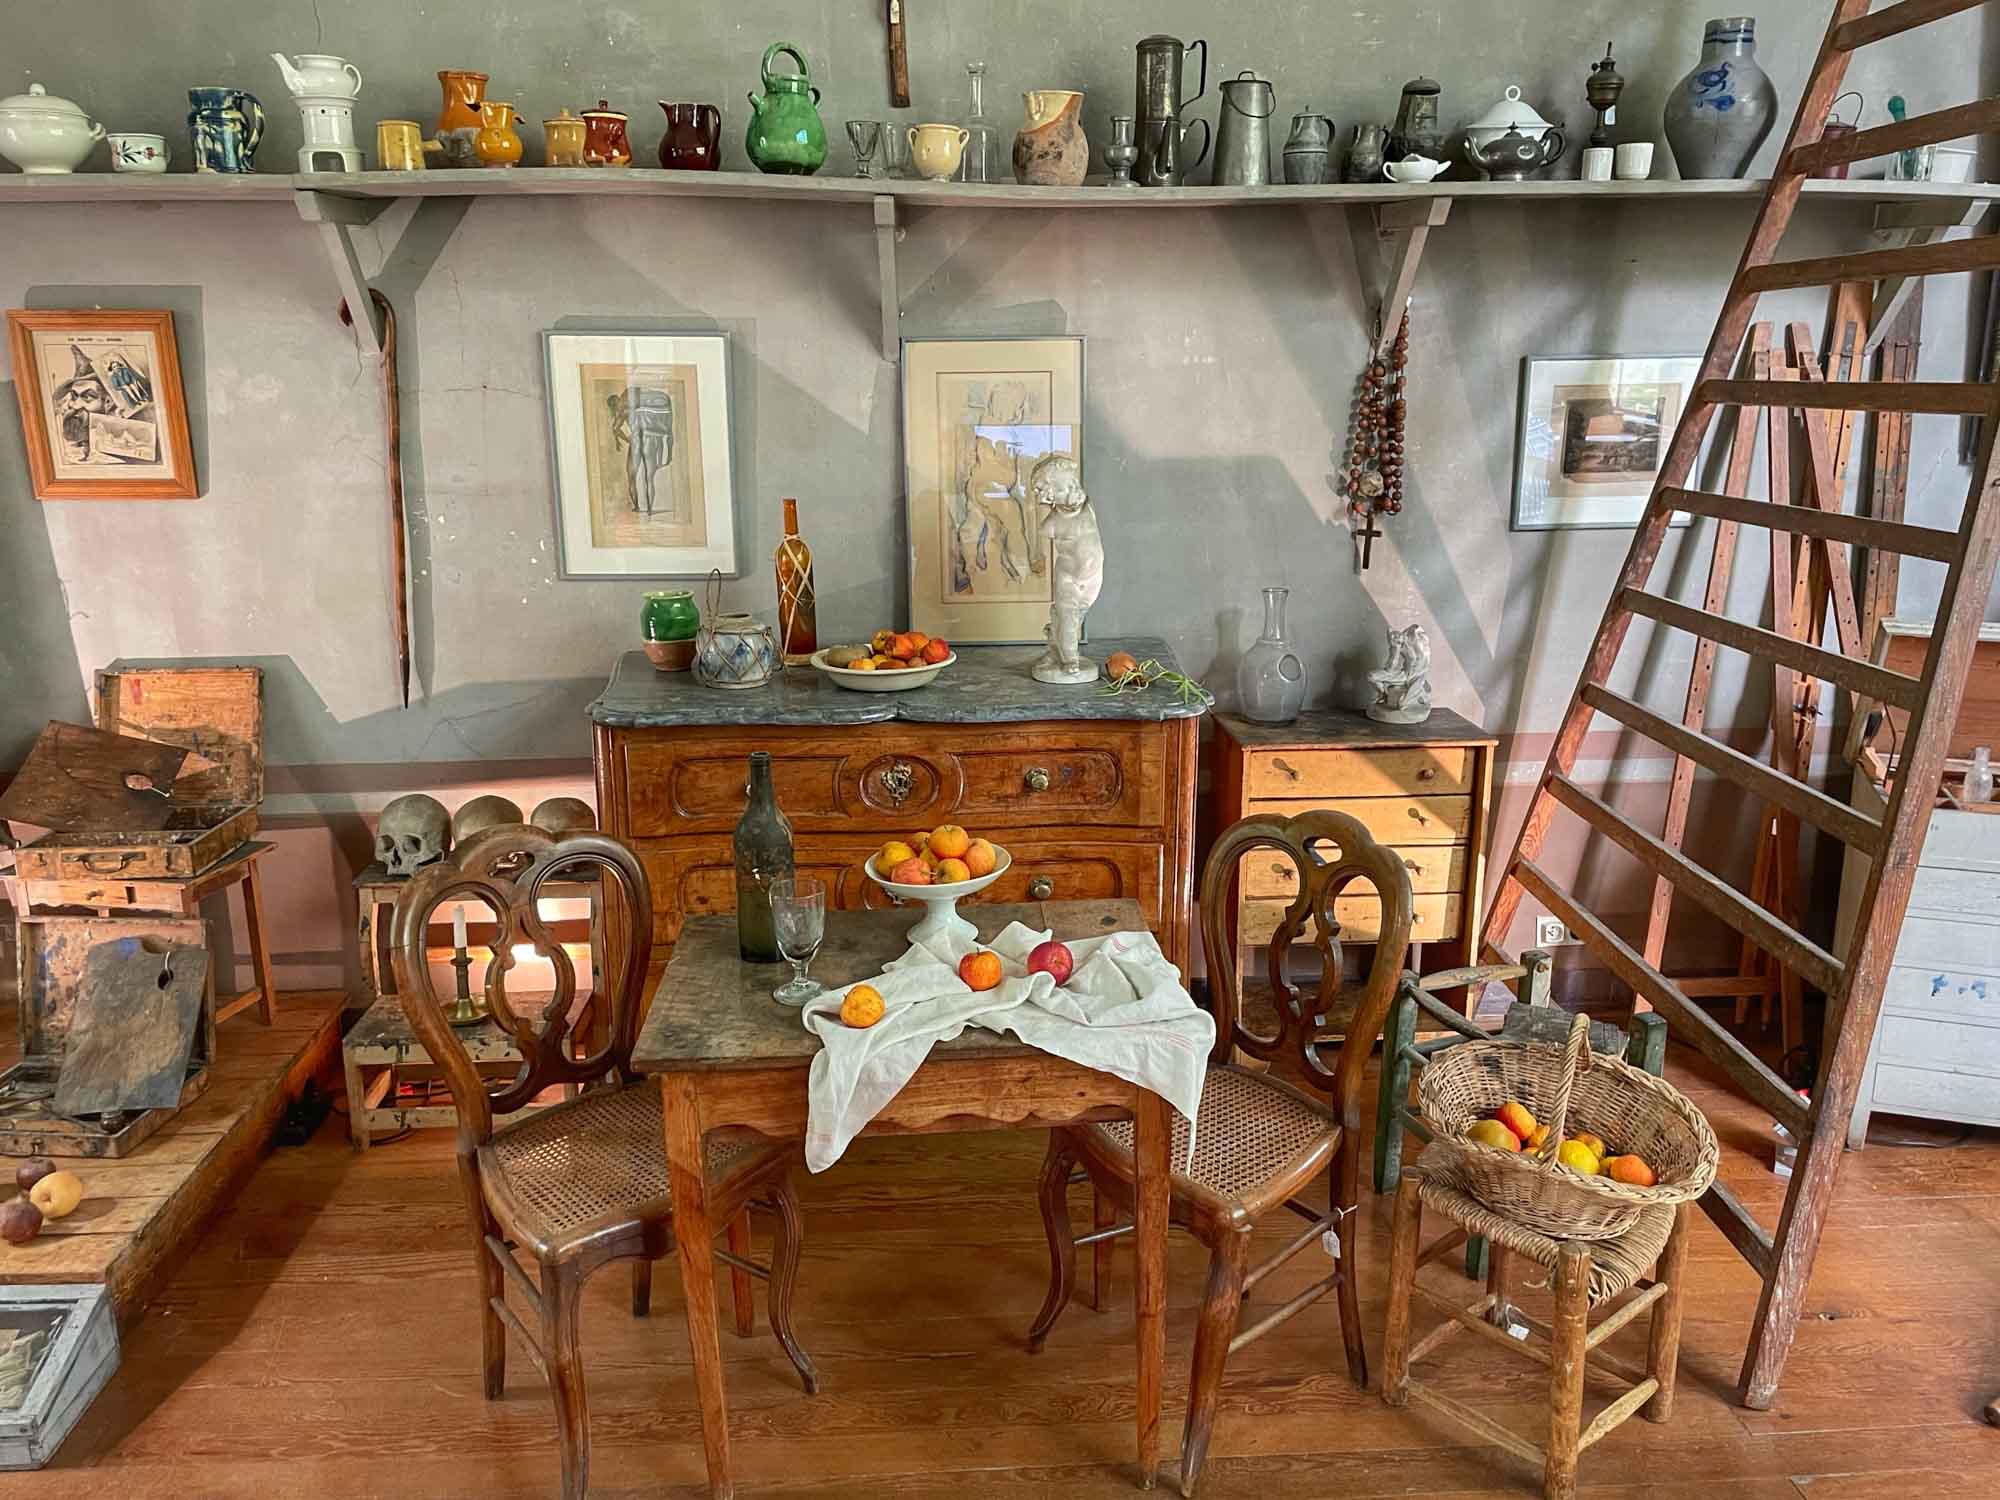 Wooden table and chairs, dresser, and ladder along with fruit props and other items in an artist's studio